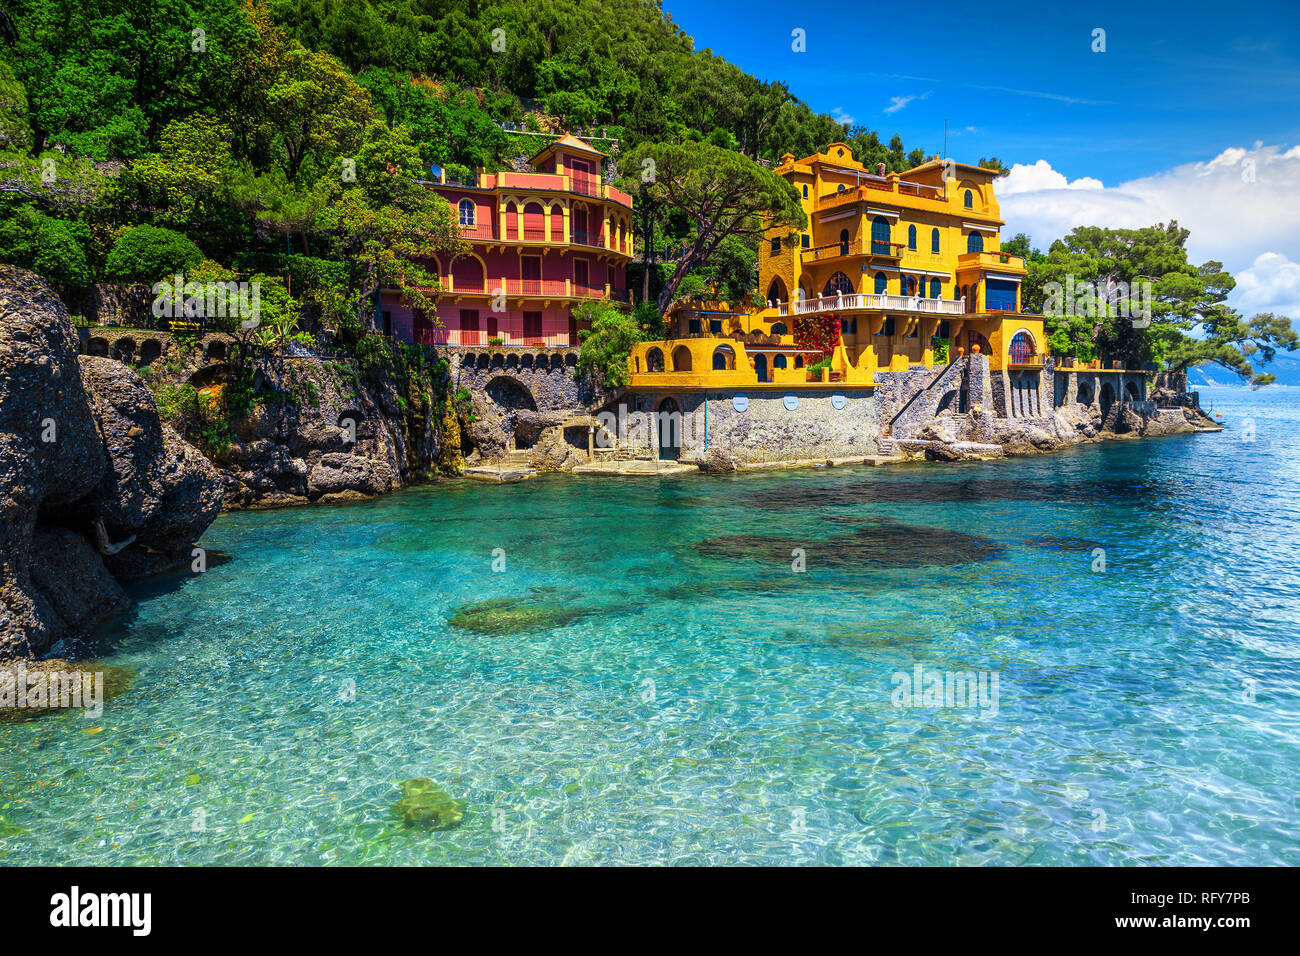 Beautiful summer holiday destination, colorful luxury seaside villas and stunning beach with clean turquoise water, Portofino, Liguria, Italy, Europe Stock Photo